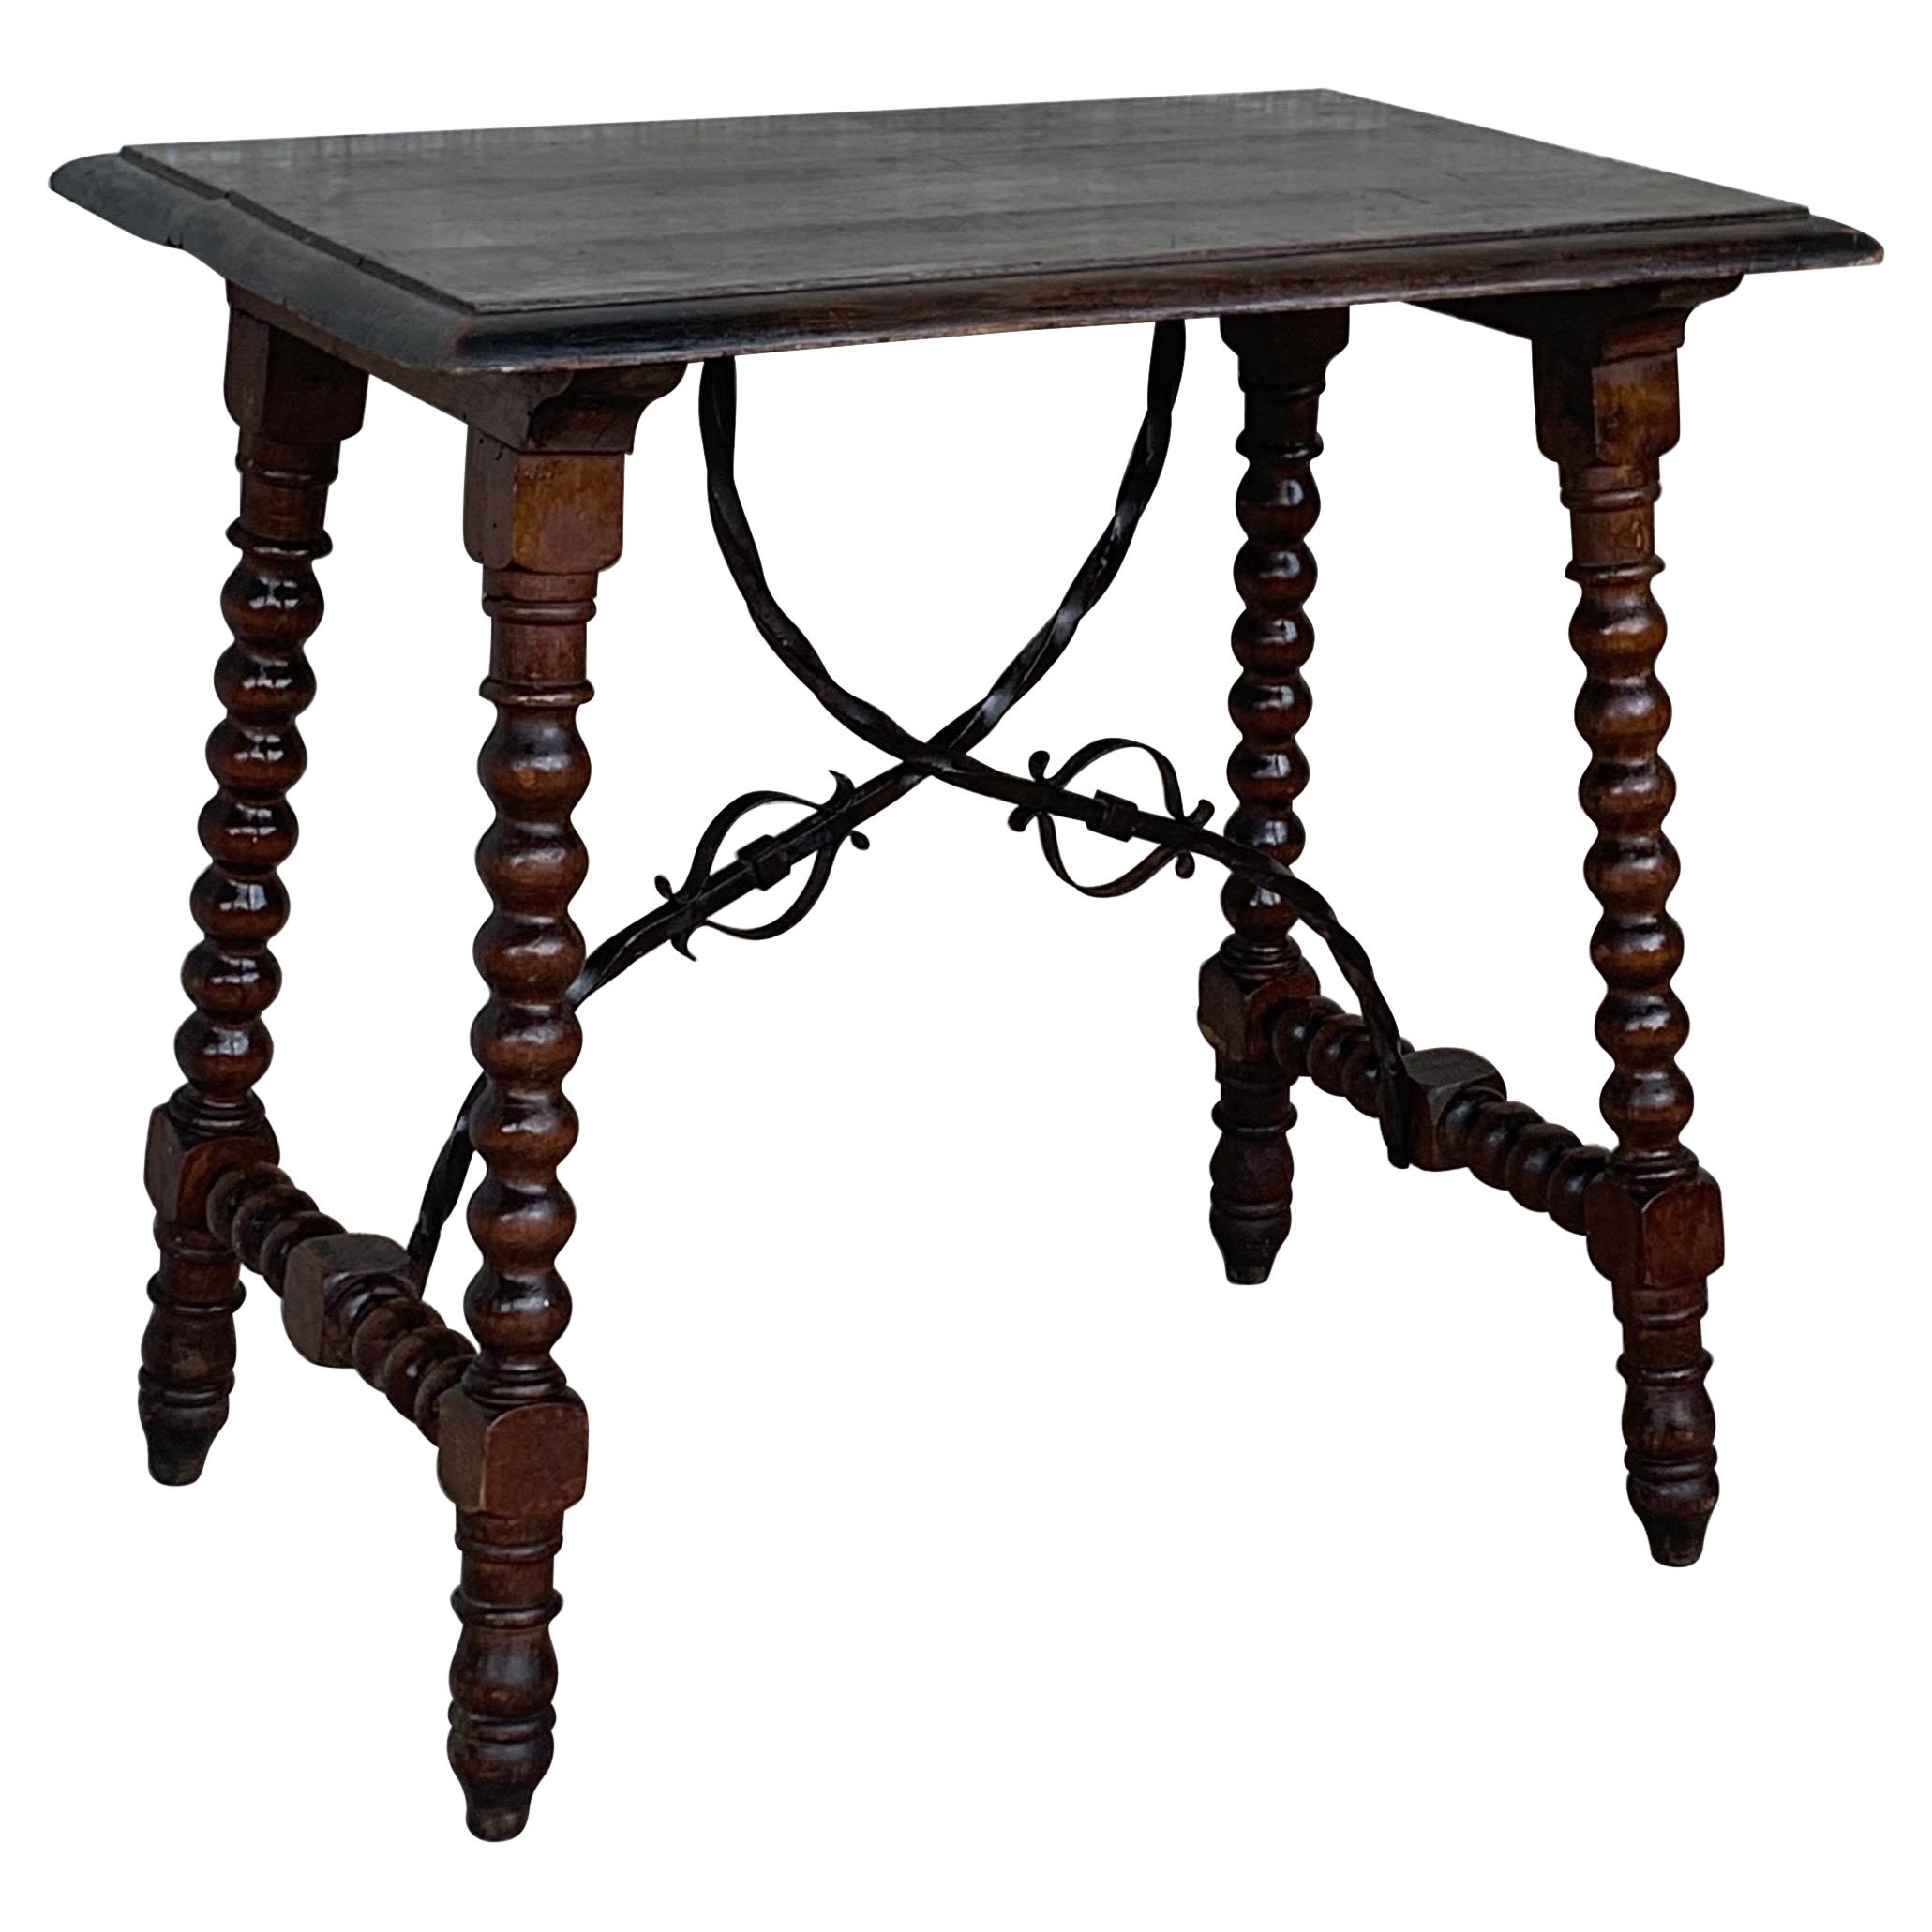 19th Spanish Walnut Side Table with Lyre Legs, Beleveled Top and Iron Stretcher